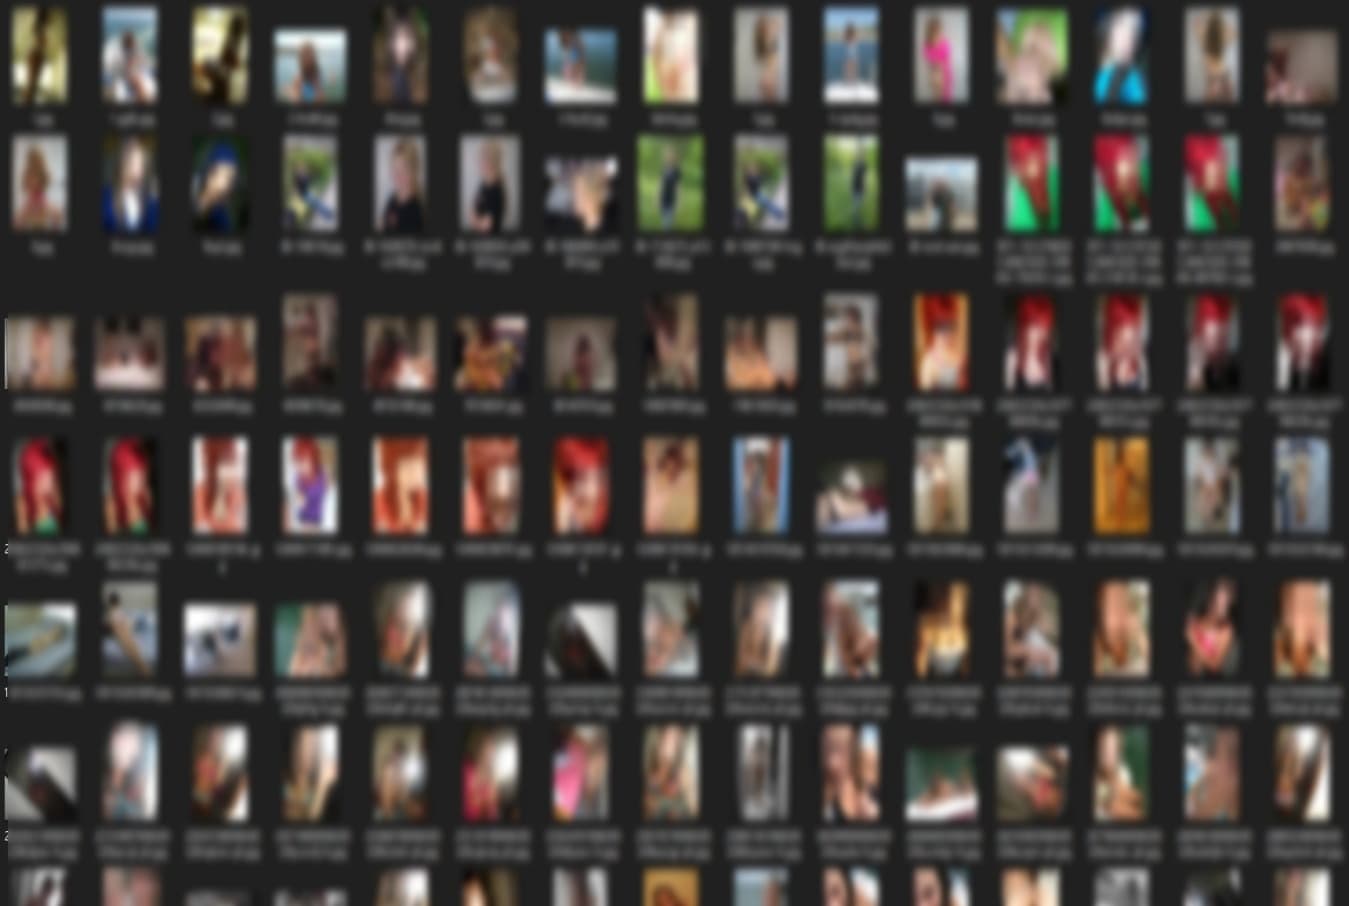 X-rated social media app Fleek exposed explicit photos of users